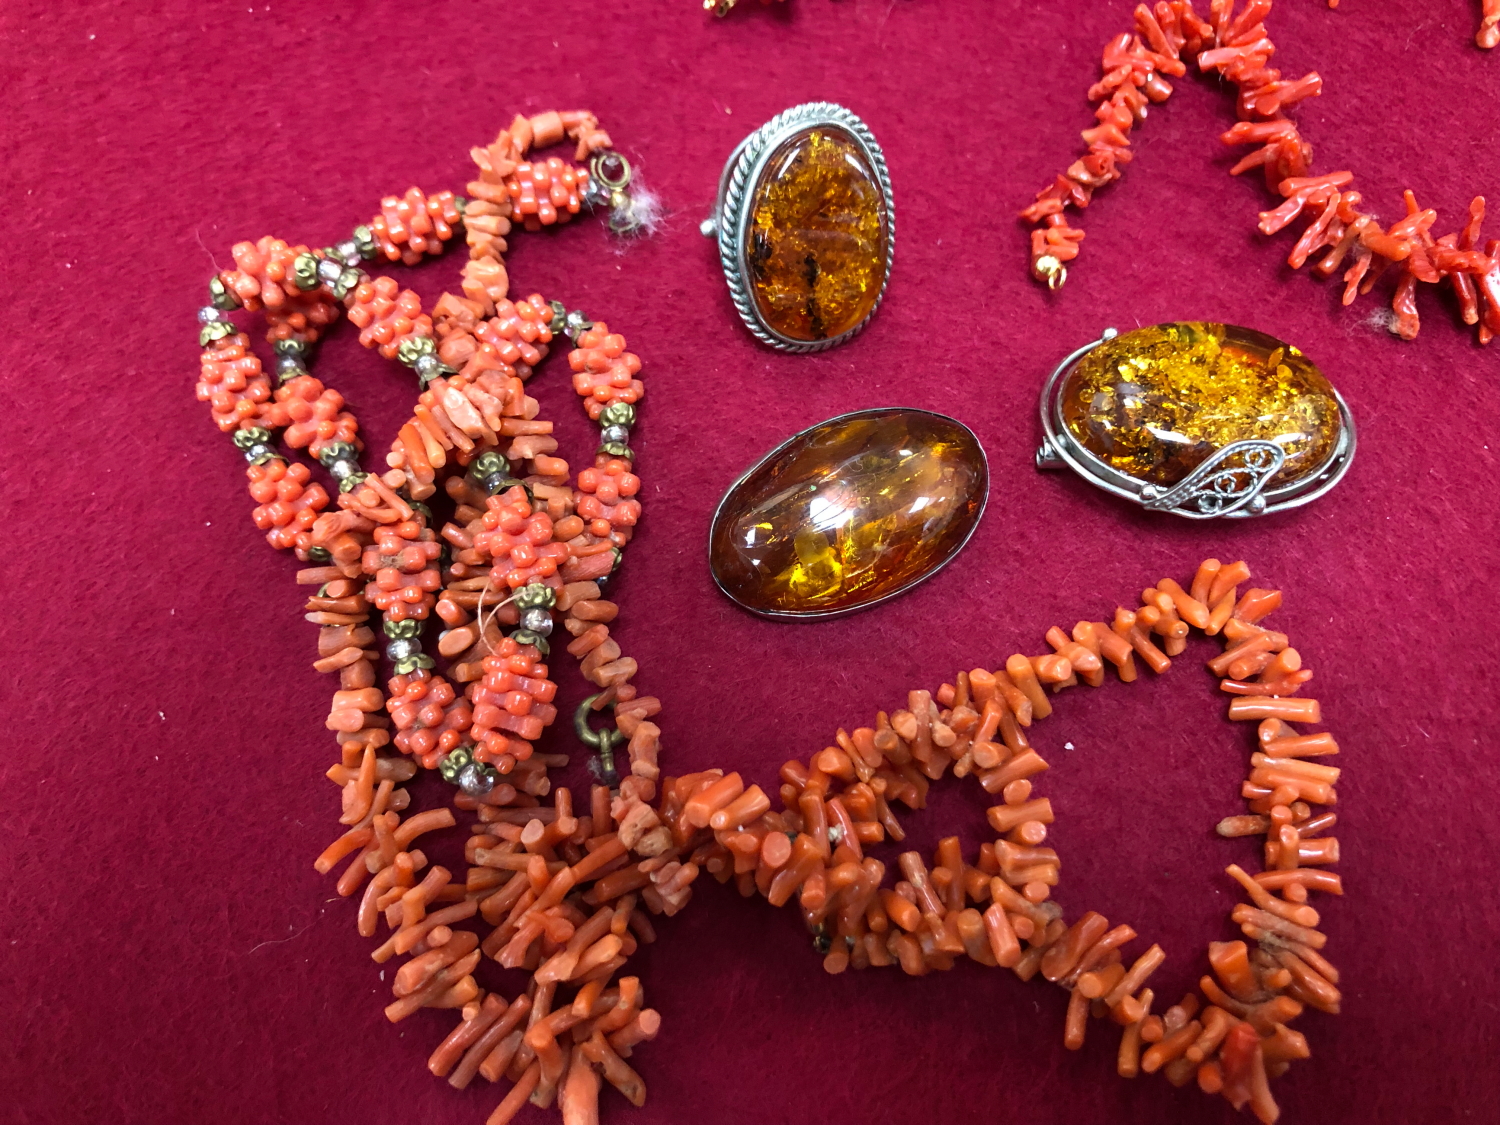 A QUANTITY OF AMBER,CORAL, RESIN AND OTHER JEWELLERY SOME PIECES SET IN SILVER. - Image 2 of 5